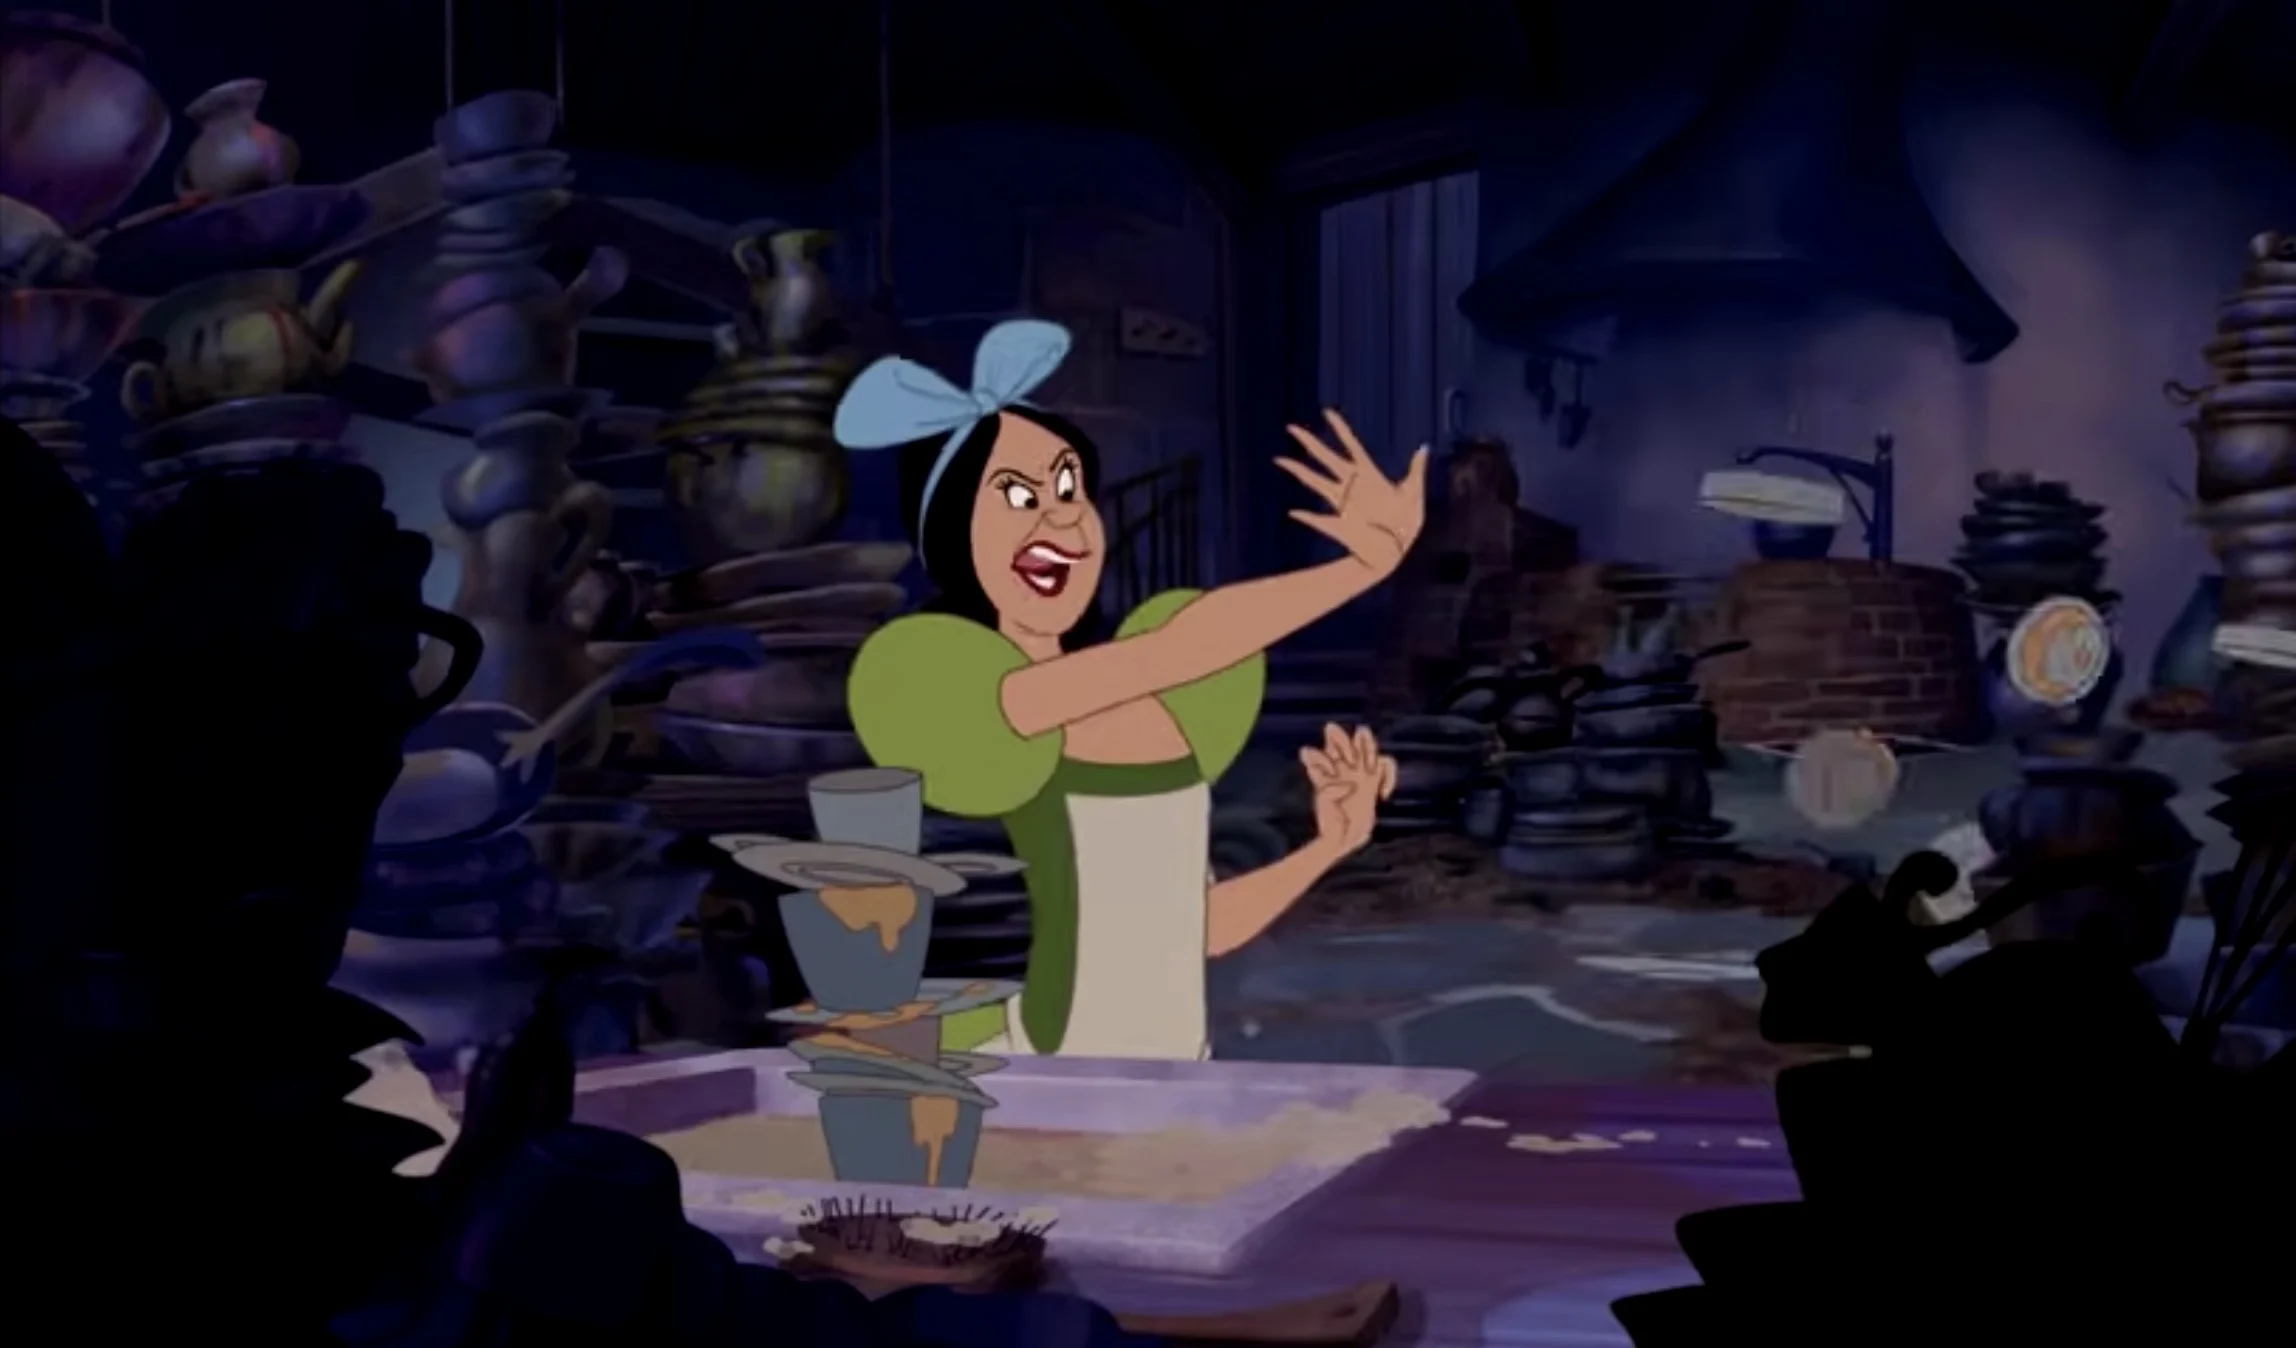 Drizella cleaning dishes in the sink